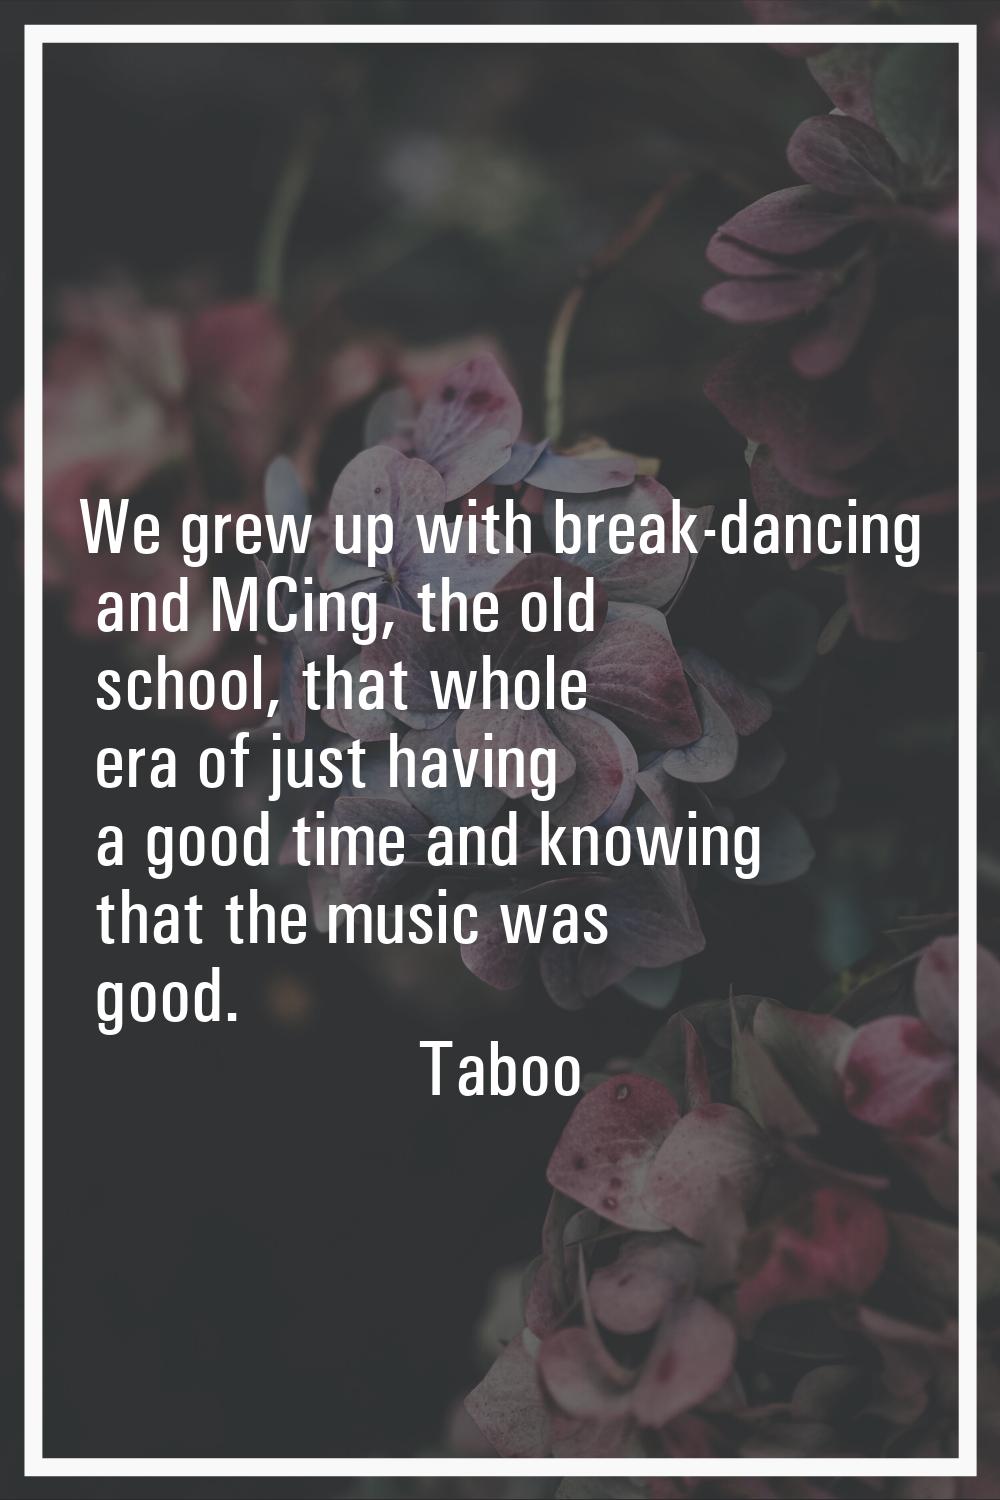 We grew up with break-dancing and MCing, the old school, that whole era of just having a good time 